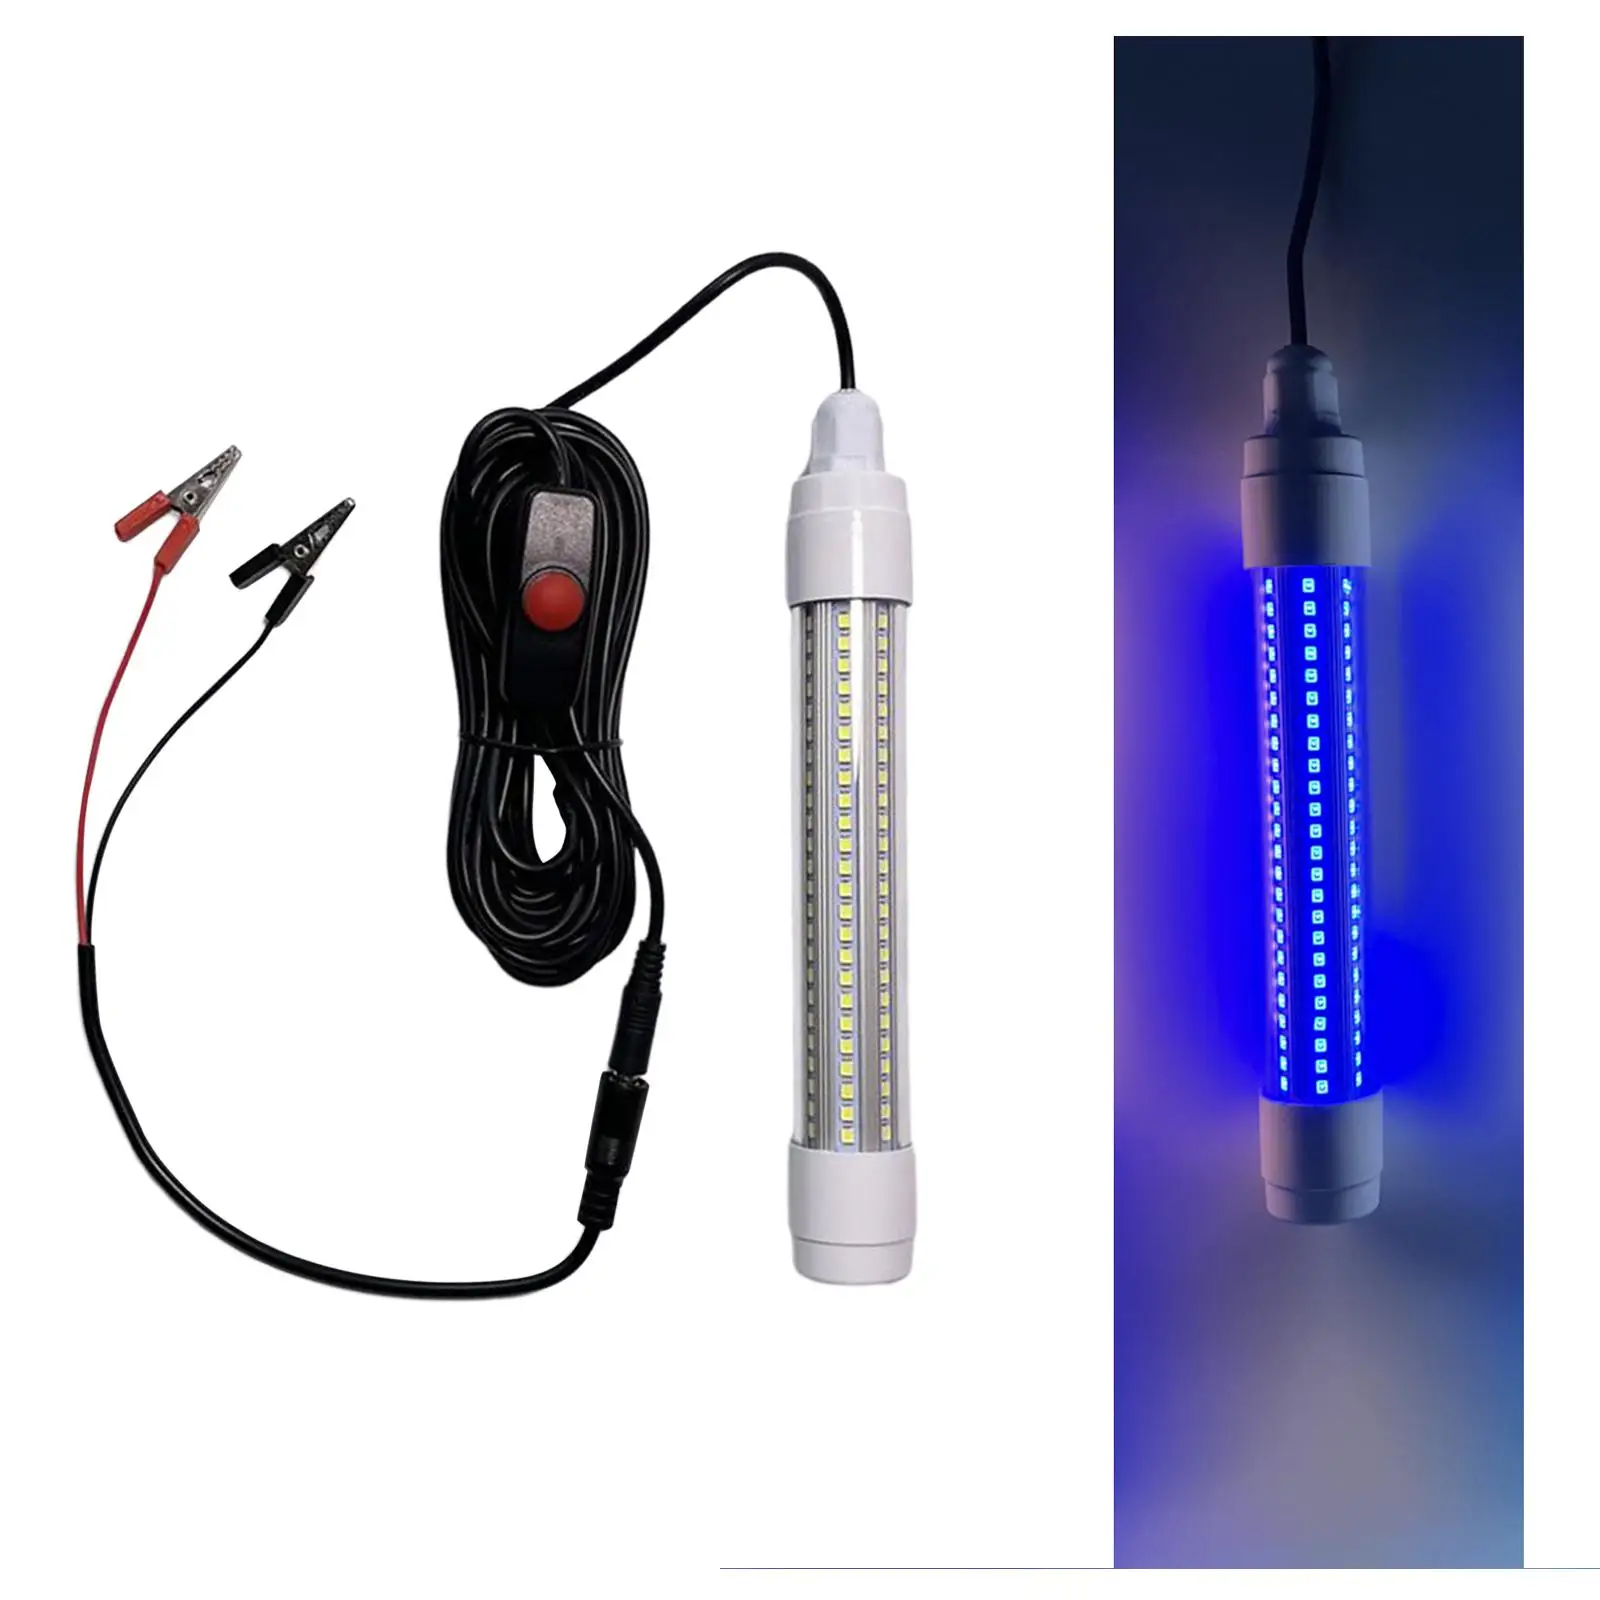 Fishing Light Lamps Underwater LED Boat Prawns Squid Lure Attract Shad